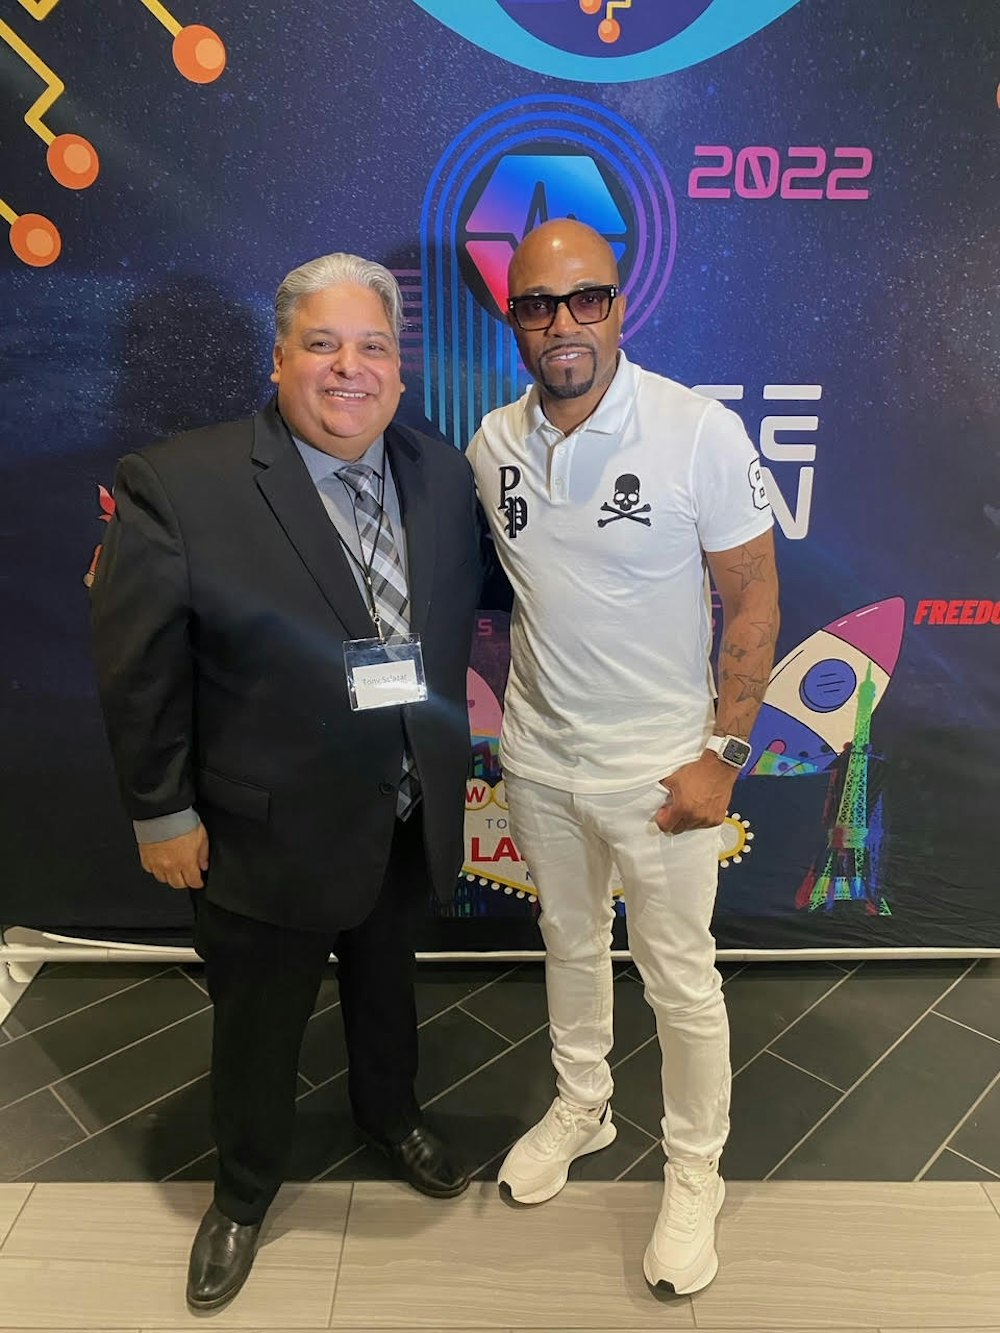 PulseCon Las Vegas 2022 Lit a Fire to the Crypto Game, Wowing Attendees with 